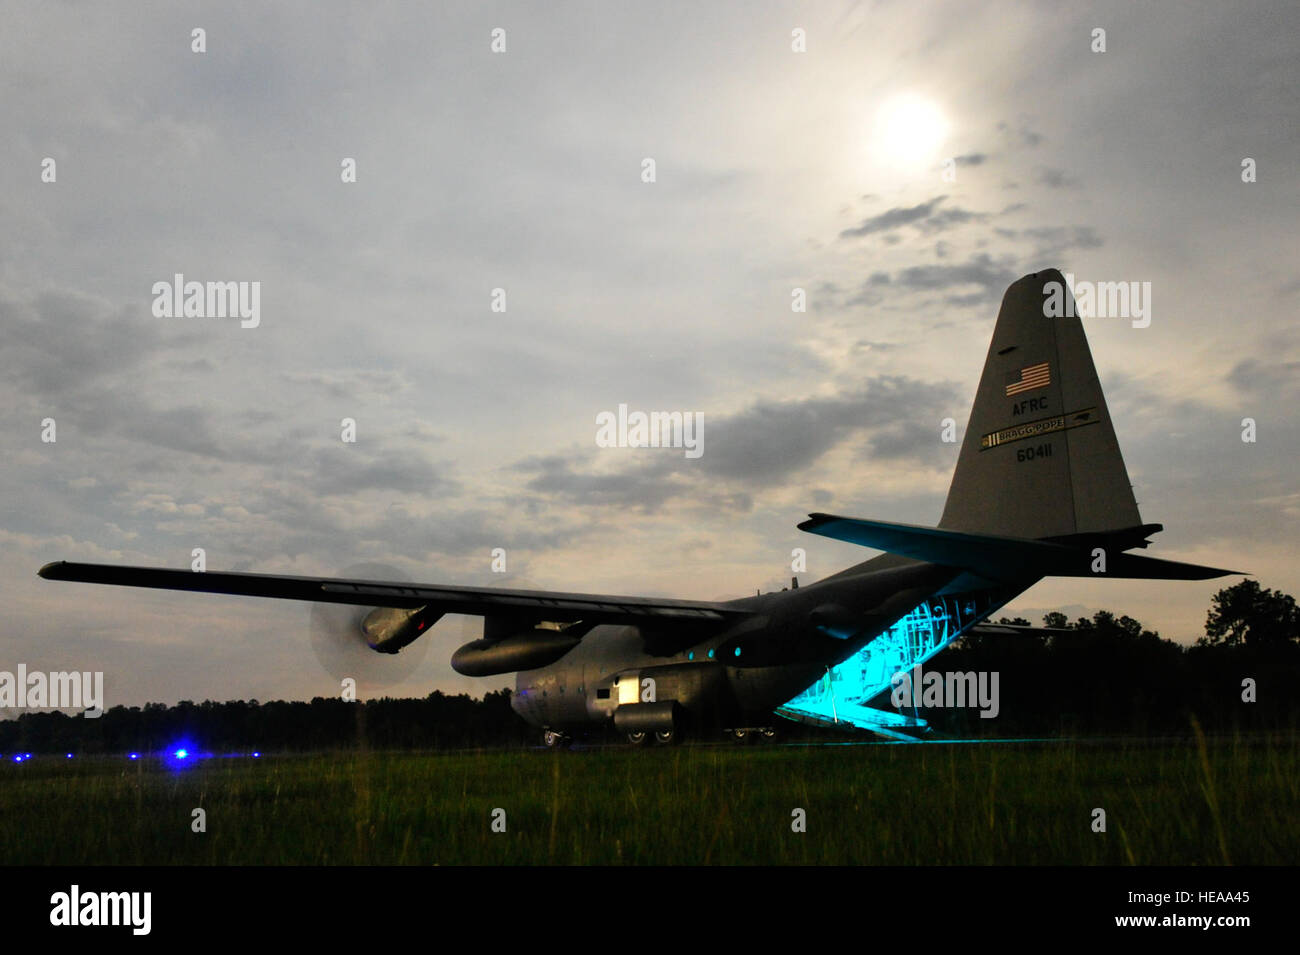 A U.S. Air Force C-130J Hercules waits for cargo to be offloaded under blackout conditions at an intermediate staging base established at Mackall Army Airfield, N.C. during Joint Operational Access Exercise 12-02, June 4, 2012.  JOAX is a two-week exercise to prepare Air Force and Army service members to respond to worldwide crises and contingencies. Stock Photo